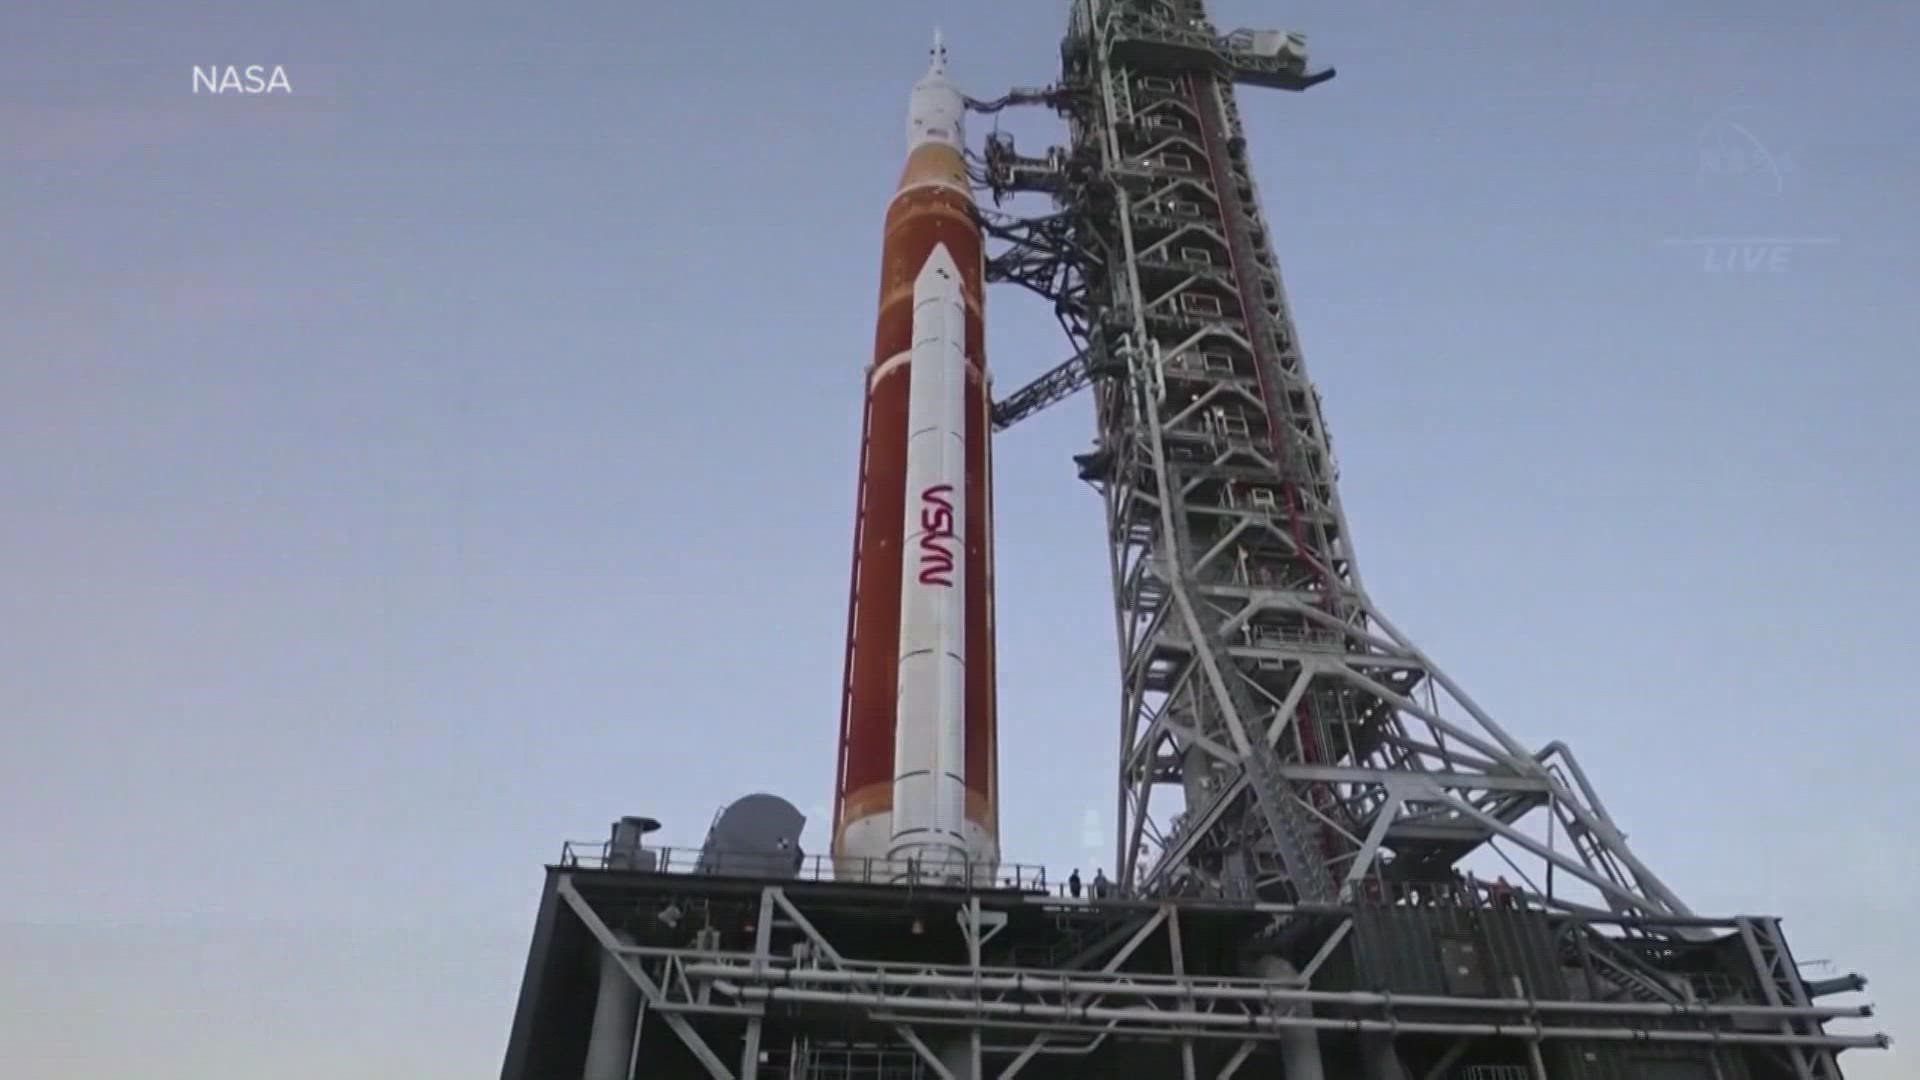 As minutes ticked away, NASA repeatedly stopped and started the fueling of the Space Launch System rocket because of a leak of highly explosive hydrogen.